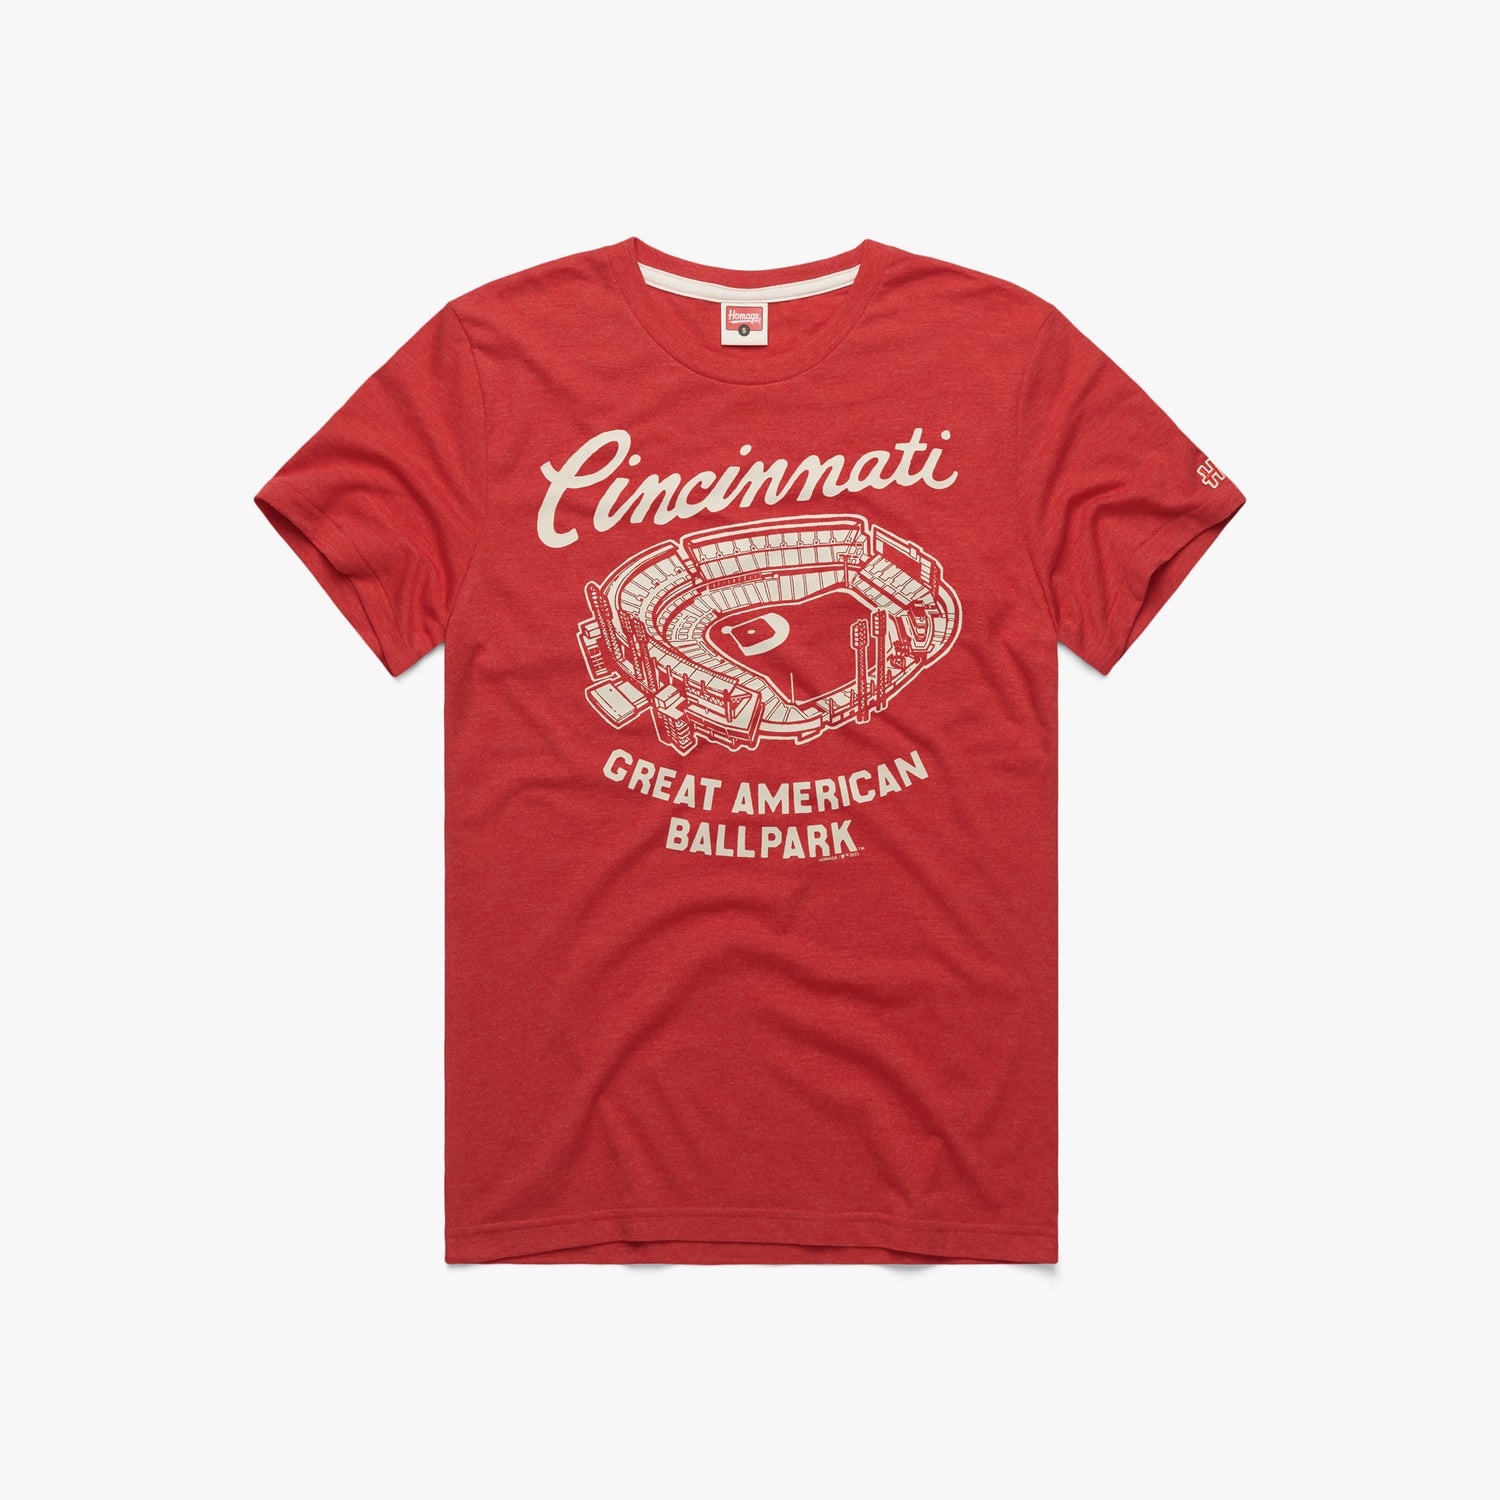 Cincinnati Great American Ballpark T-Shirt from Homage. | Red | Vintage Apparel from Homage.